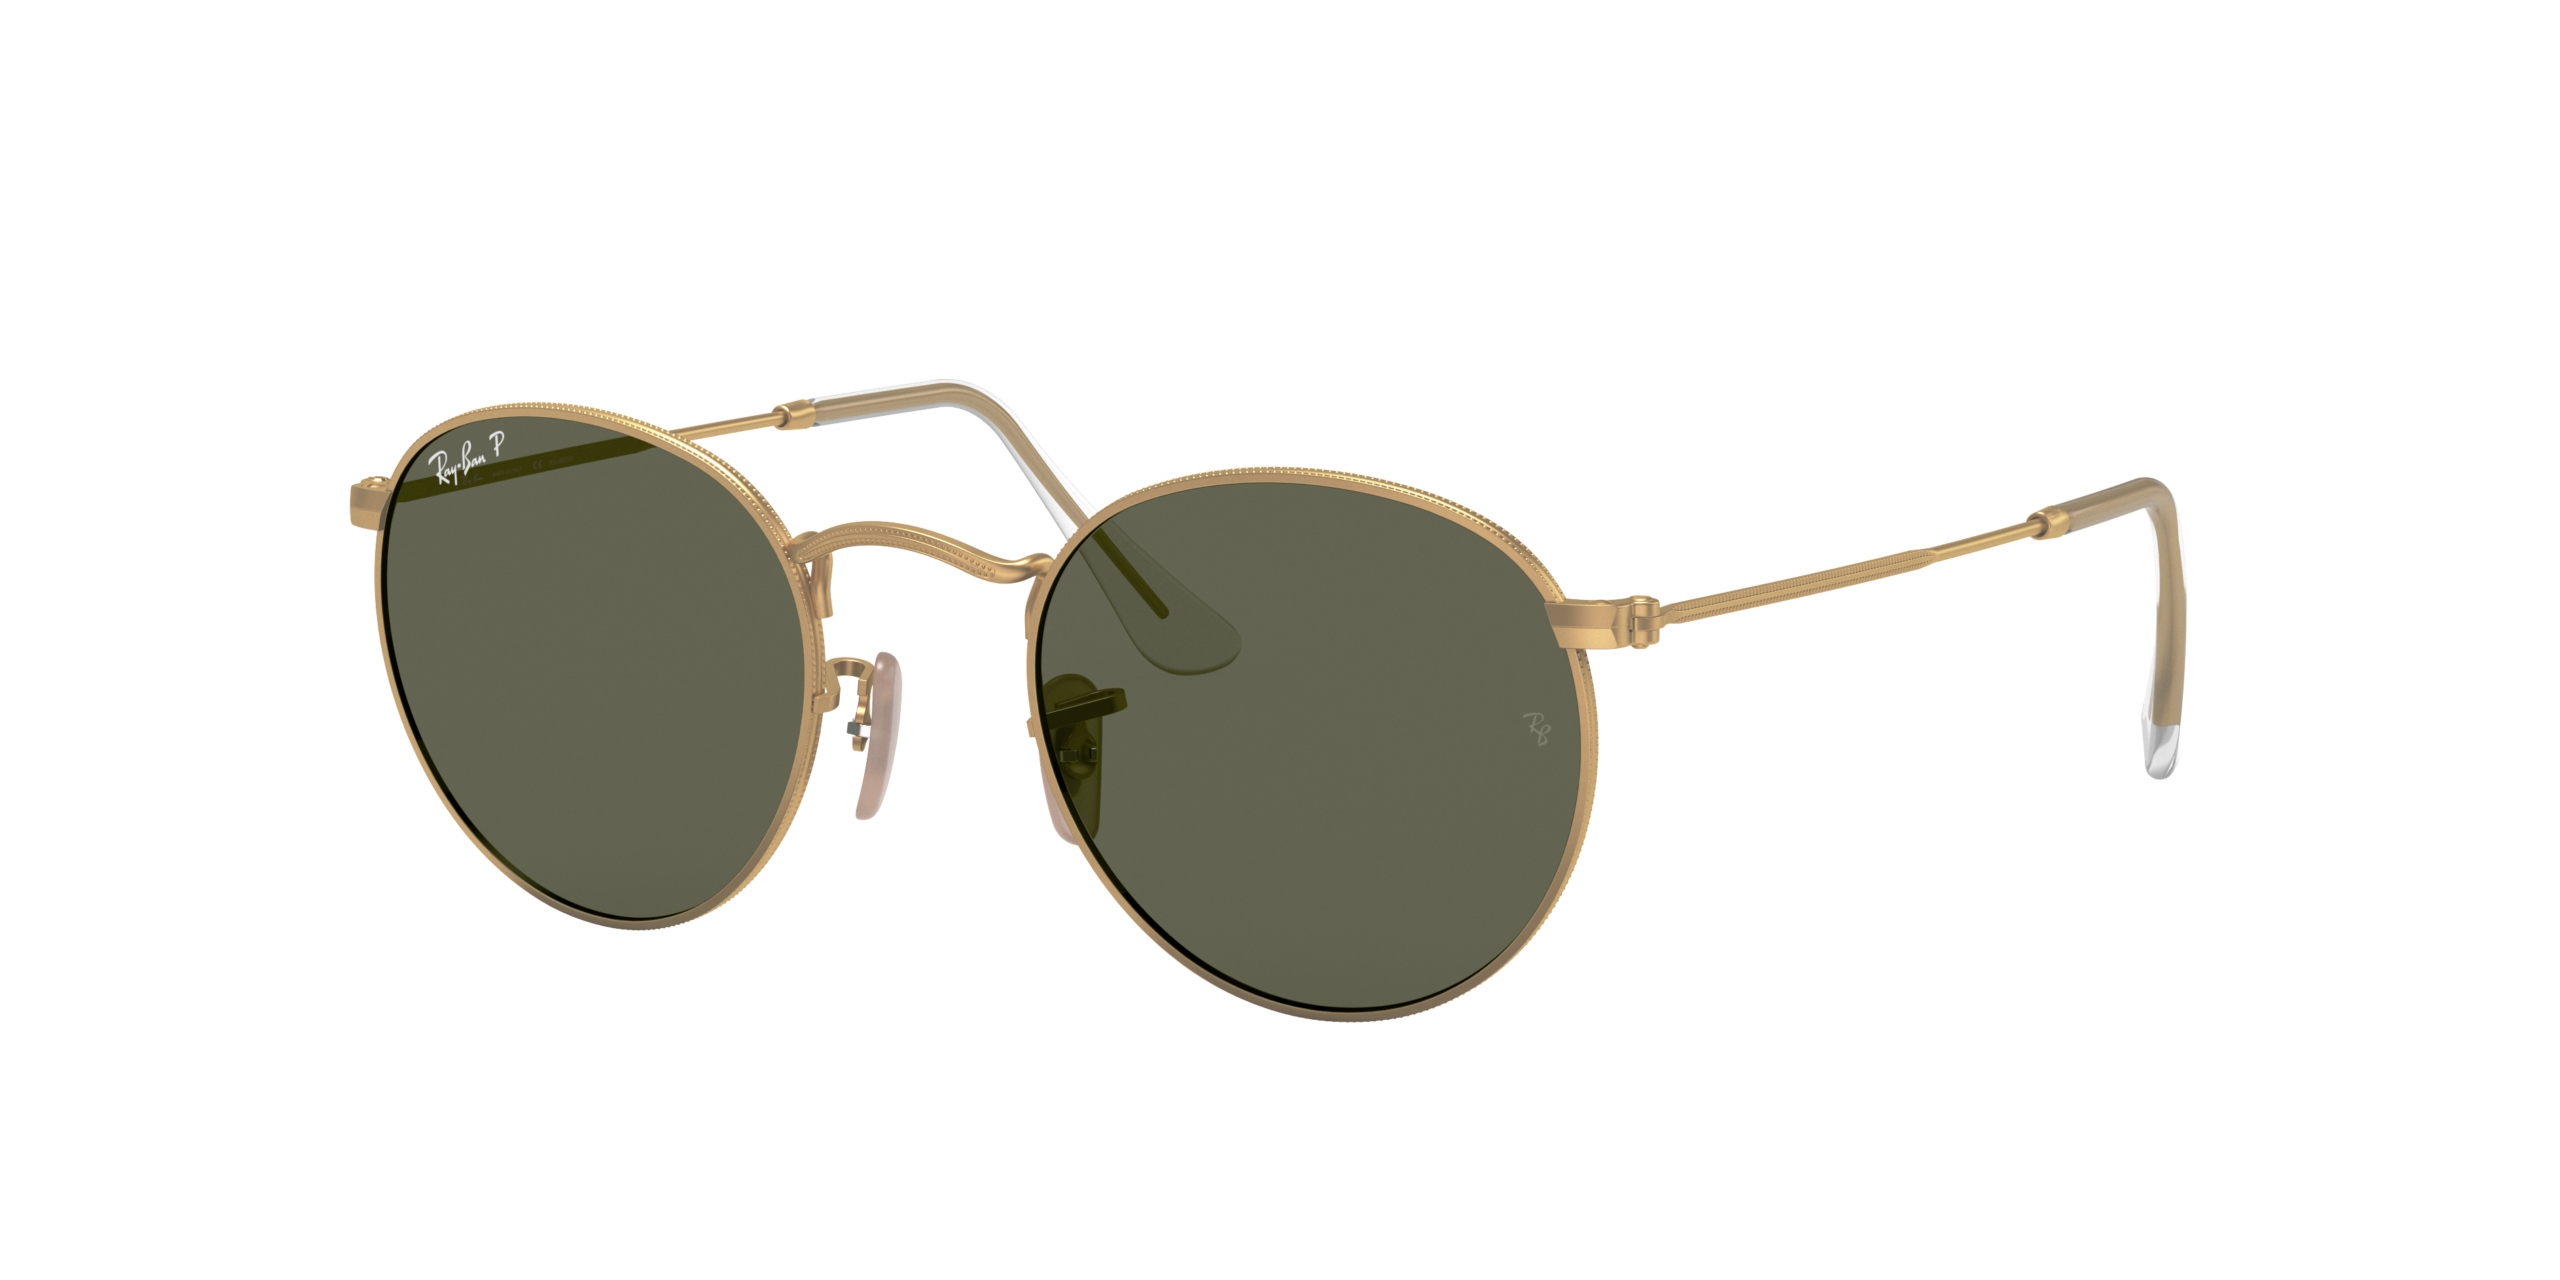 Lunette de soleil Ray Ban Round Metal Polarized Green Classic Gold